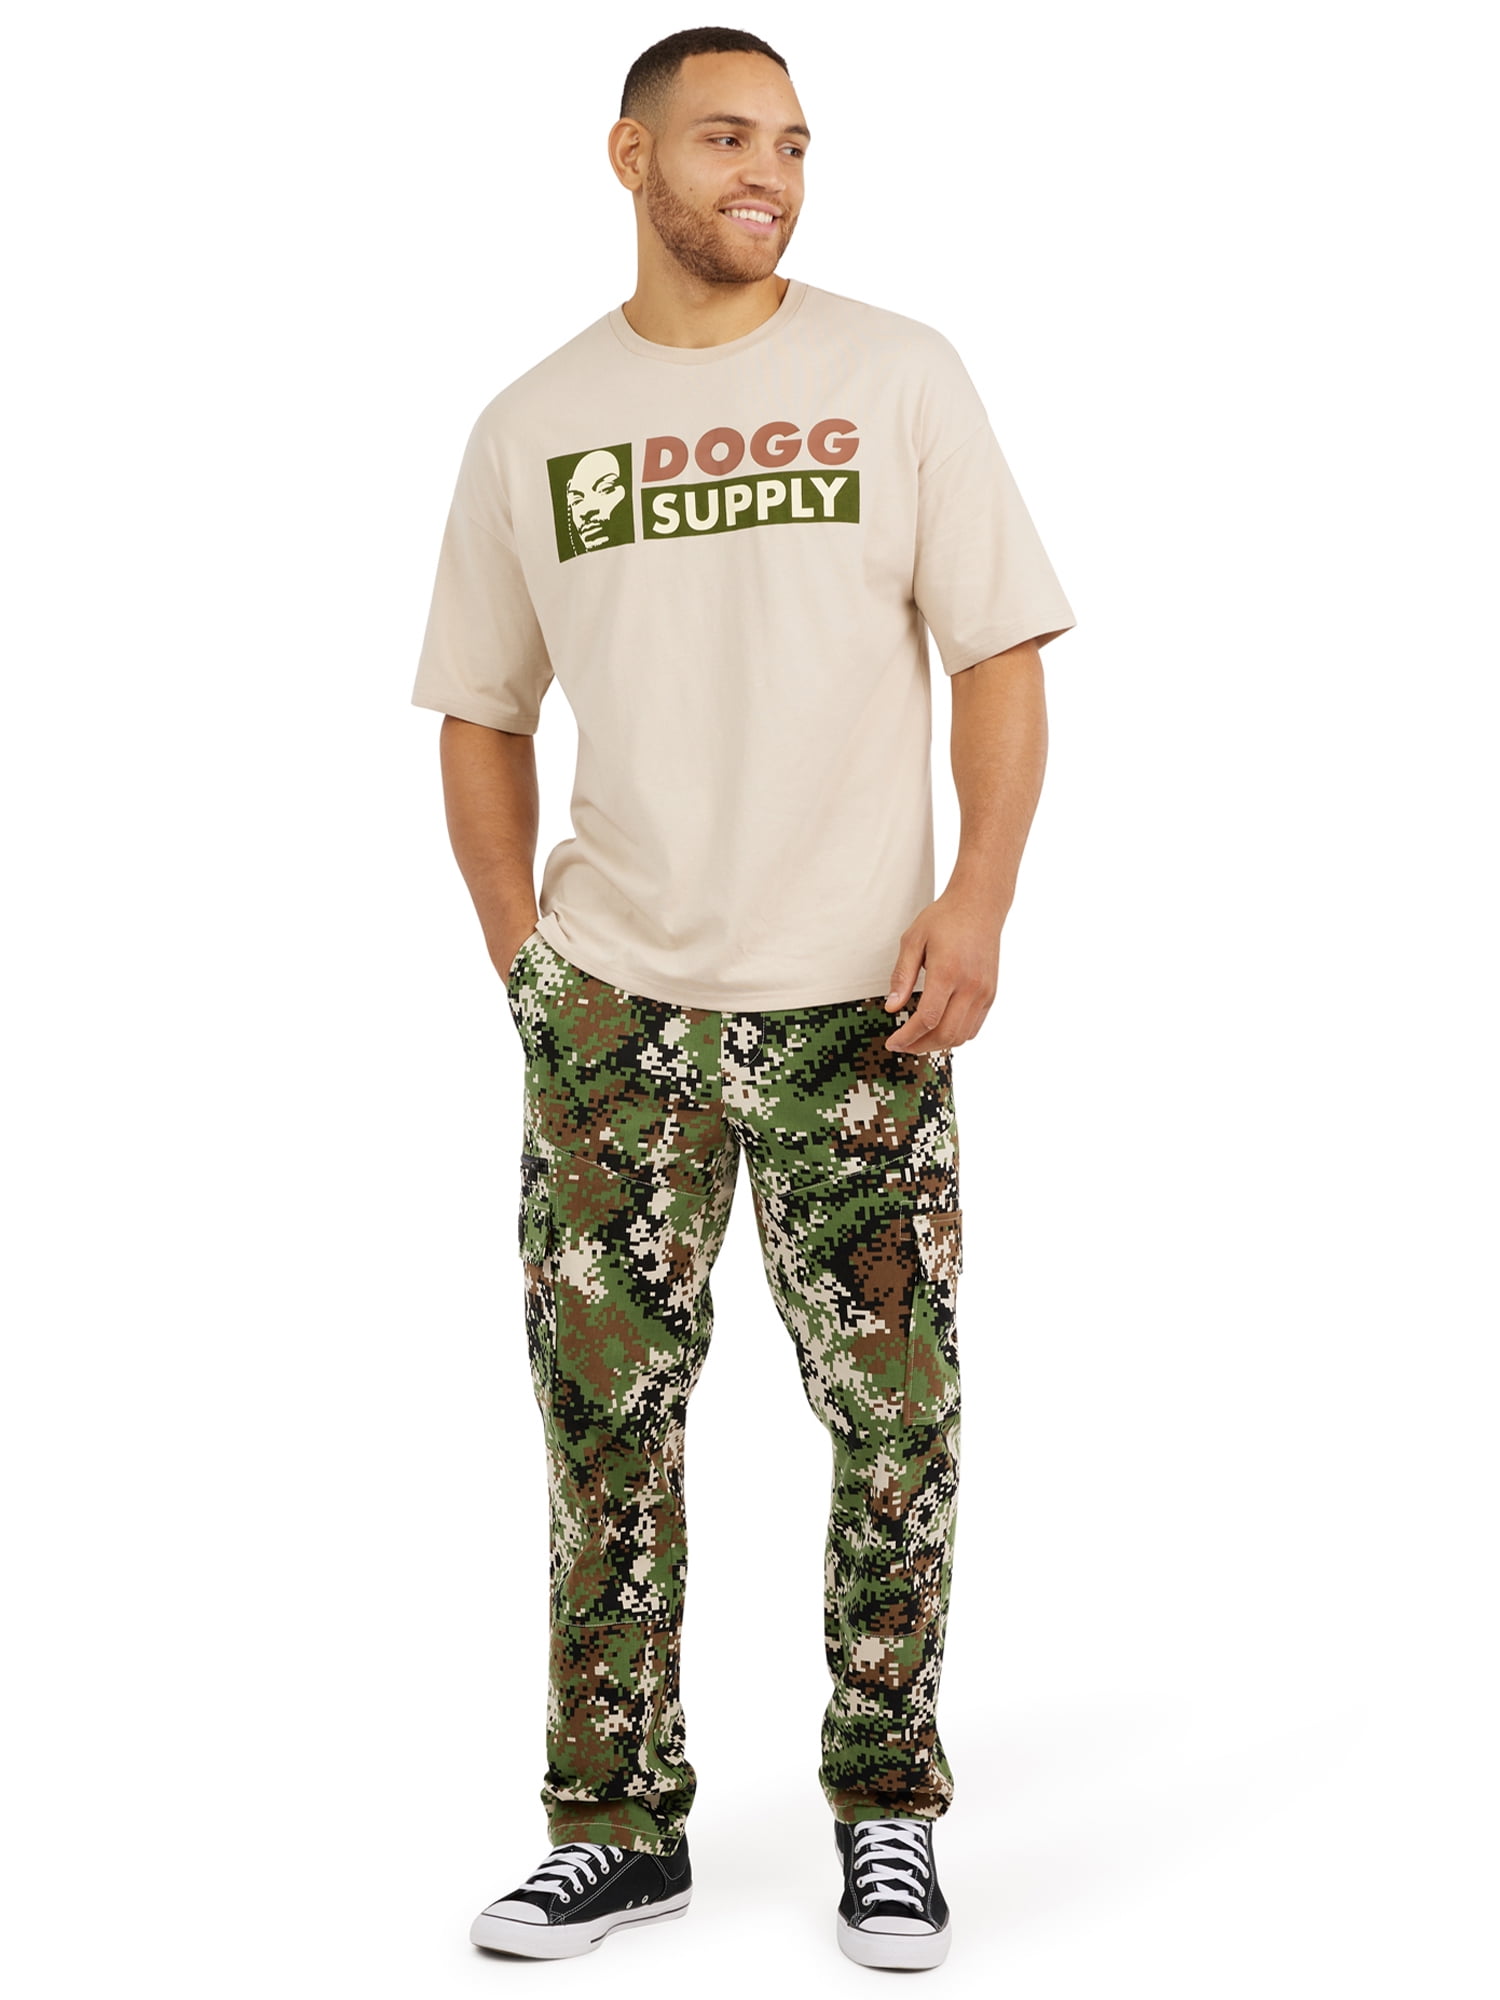 Dogg Supply by Snoop Dogg Men's and Big Men's Bungee Cargo Pants, Sizes  XS-3XL